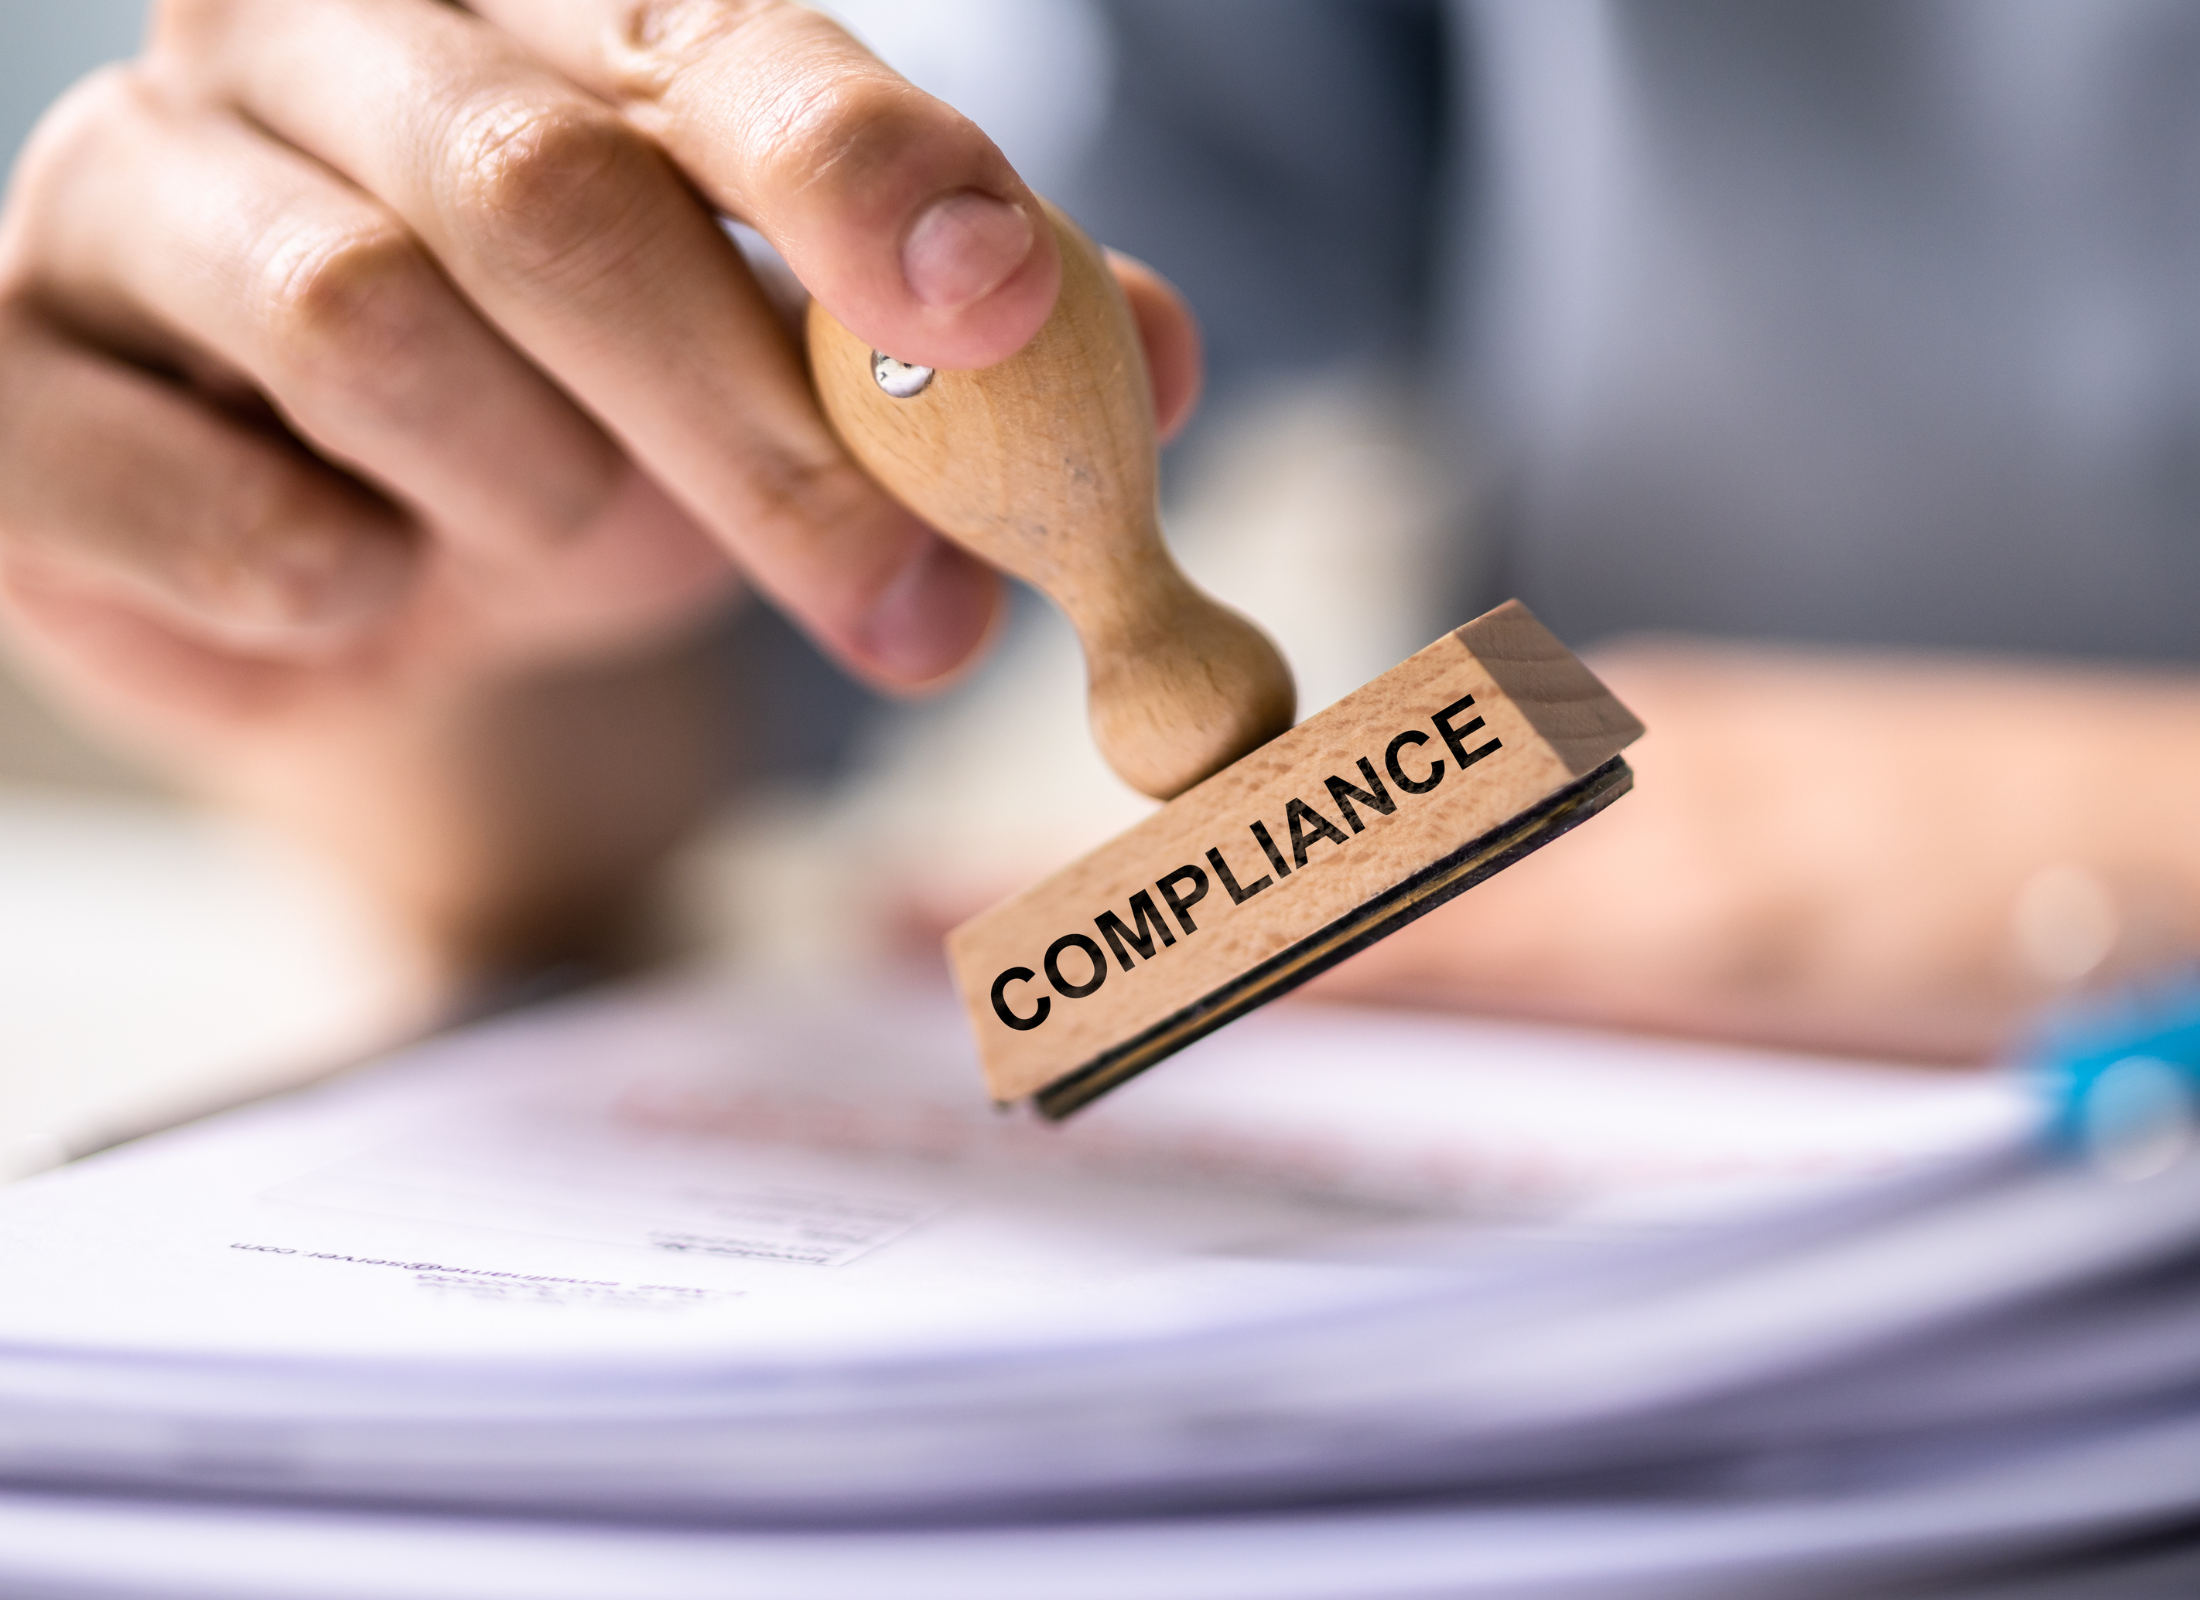 Rules, Regulations, and More Rules: Staying Compliant in a Changing World.